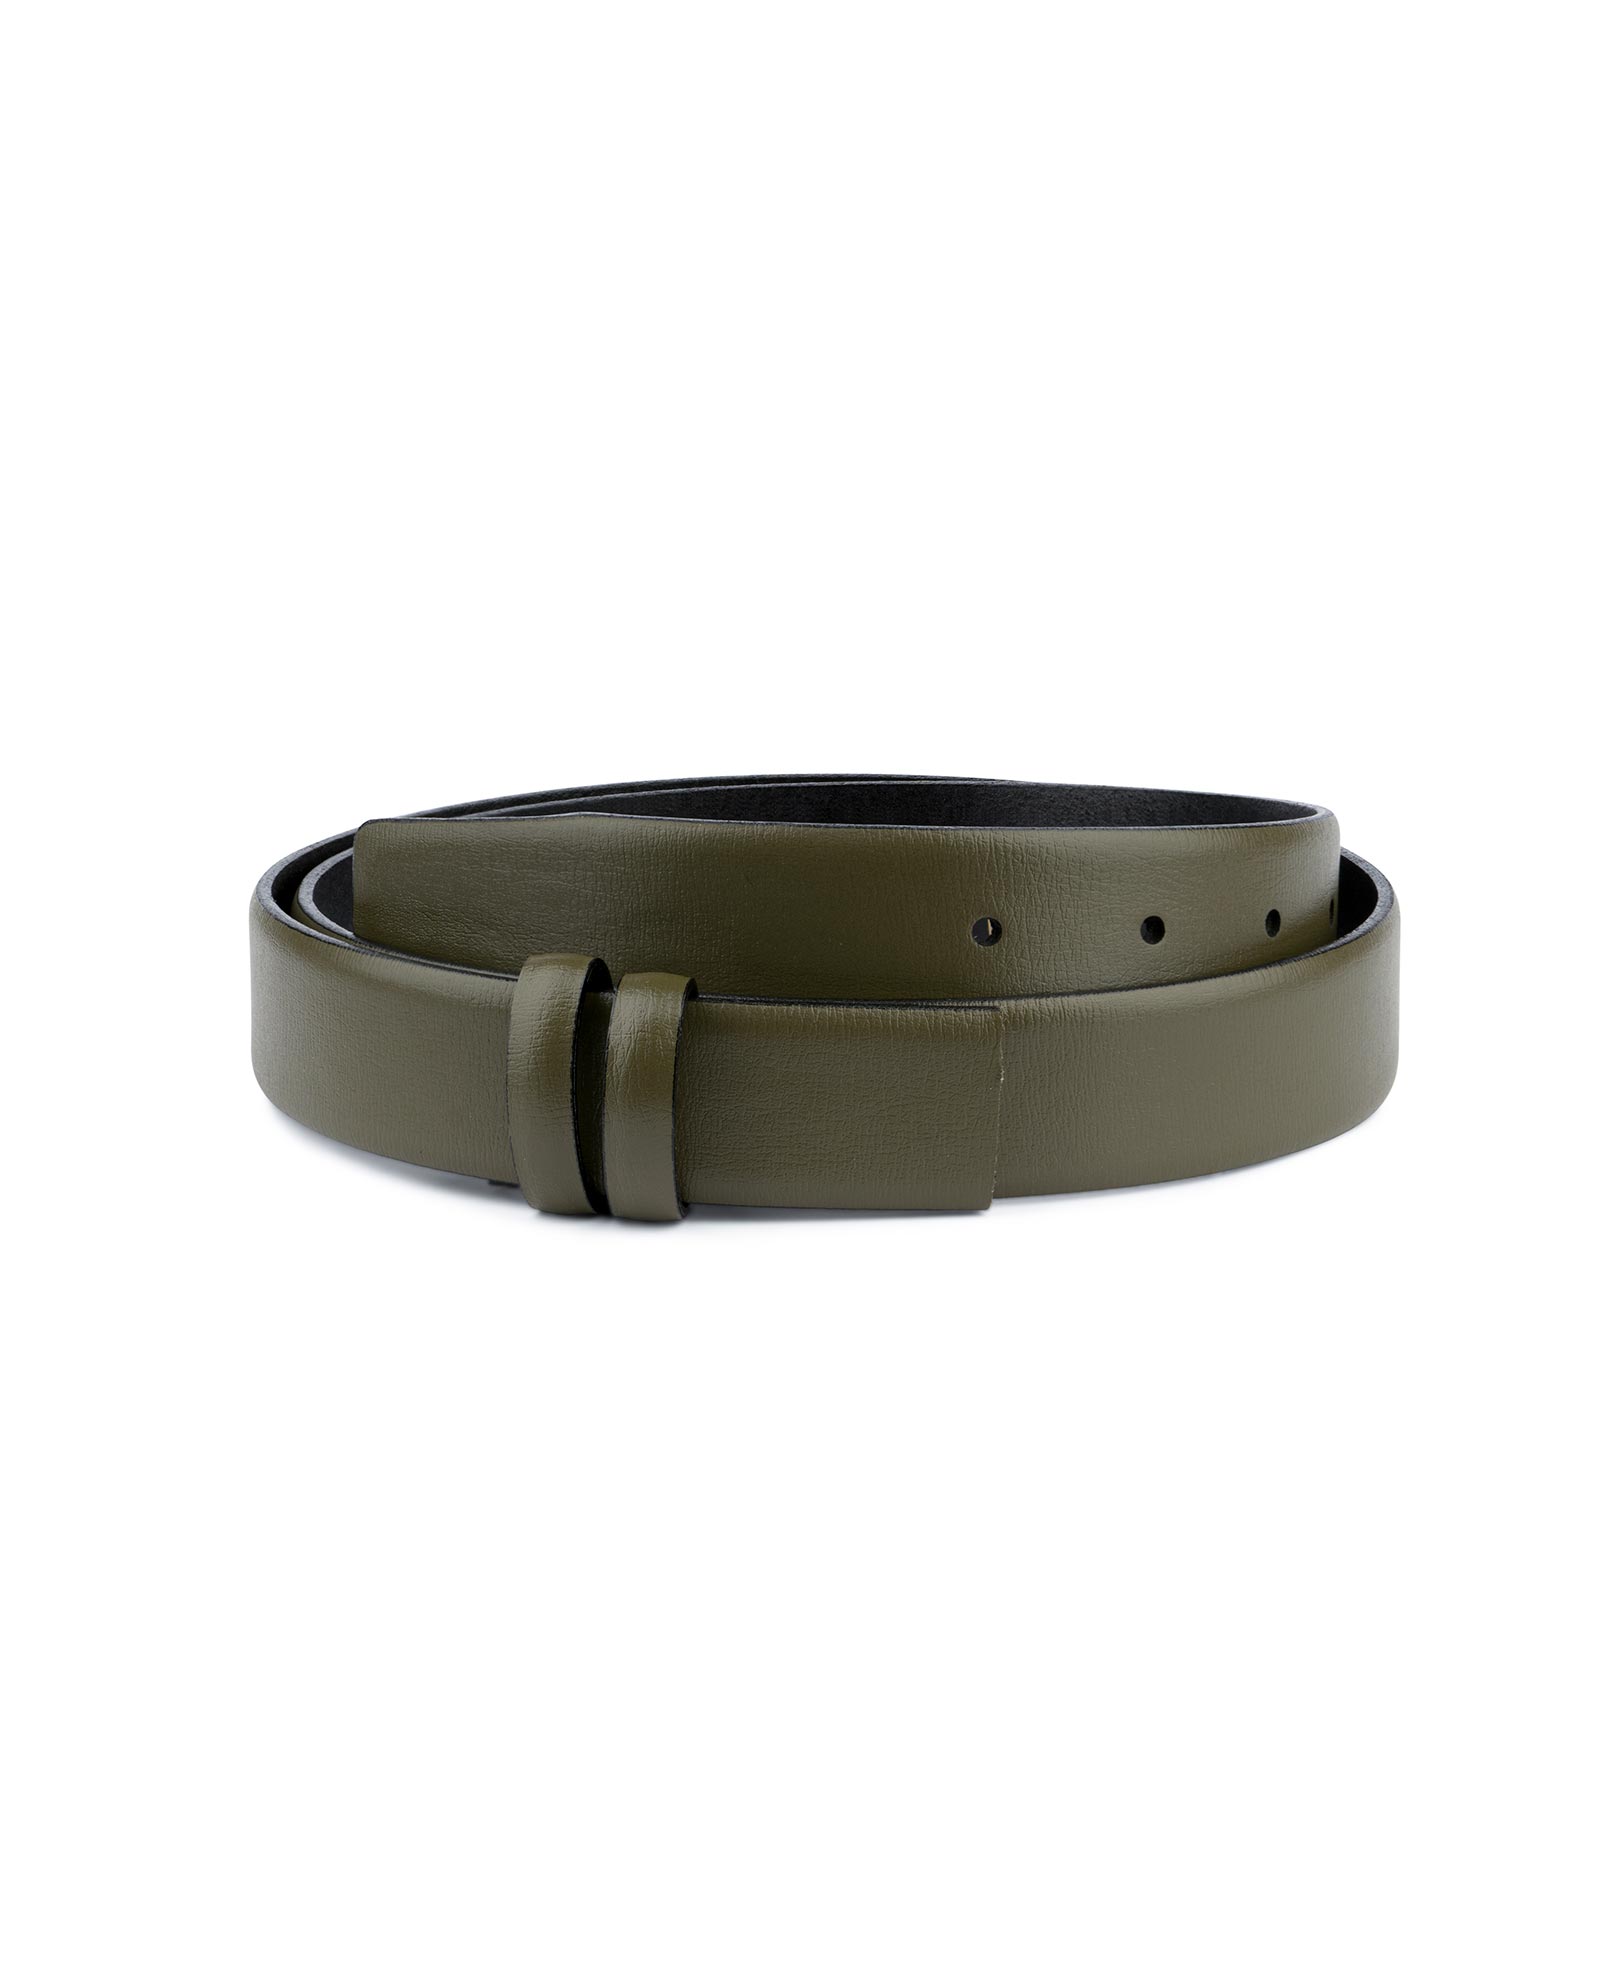 Buy Oliver Green Belt Without Buckle | Genuine Leather | Capo Pelle